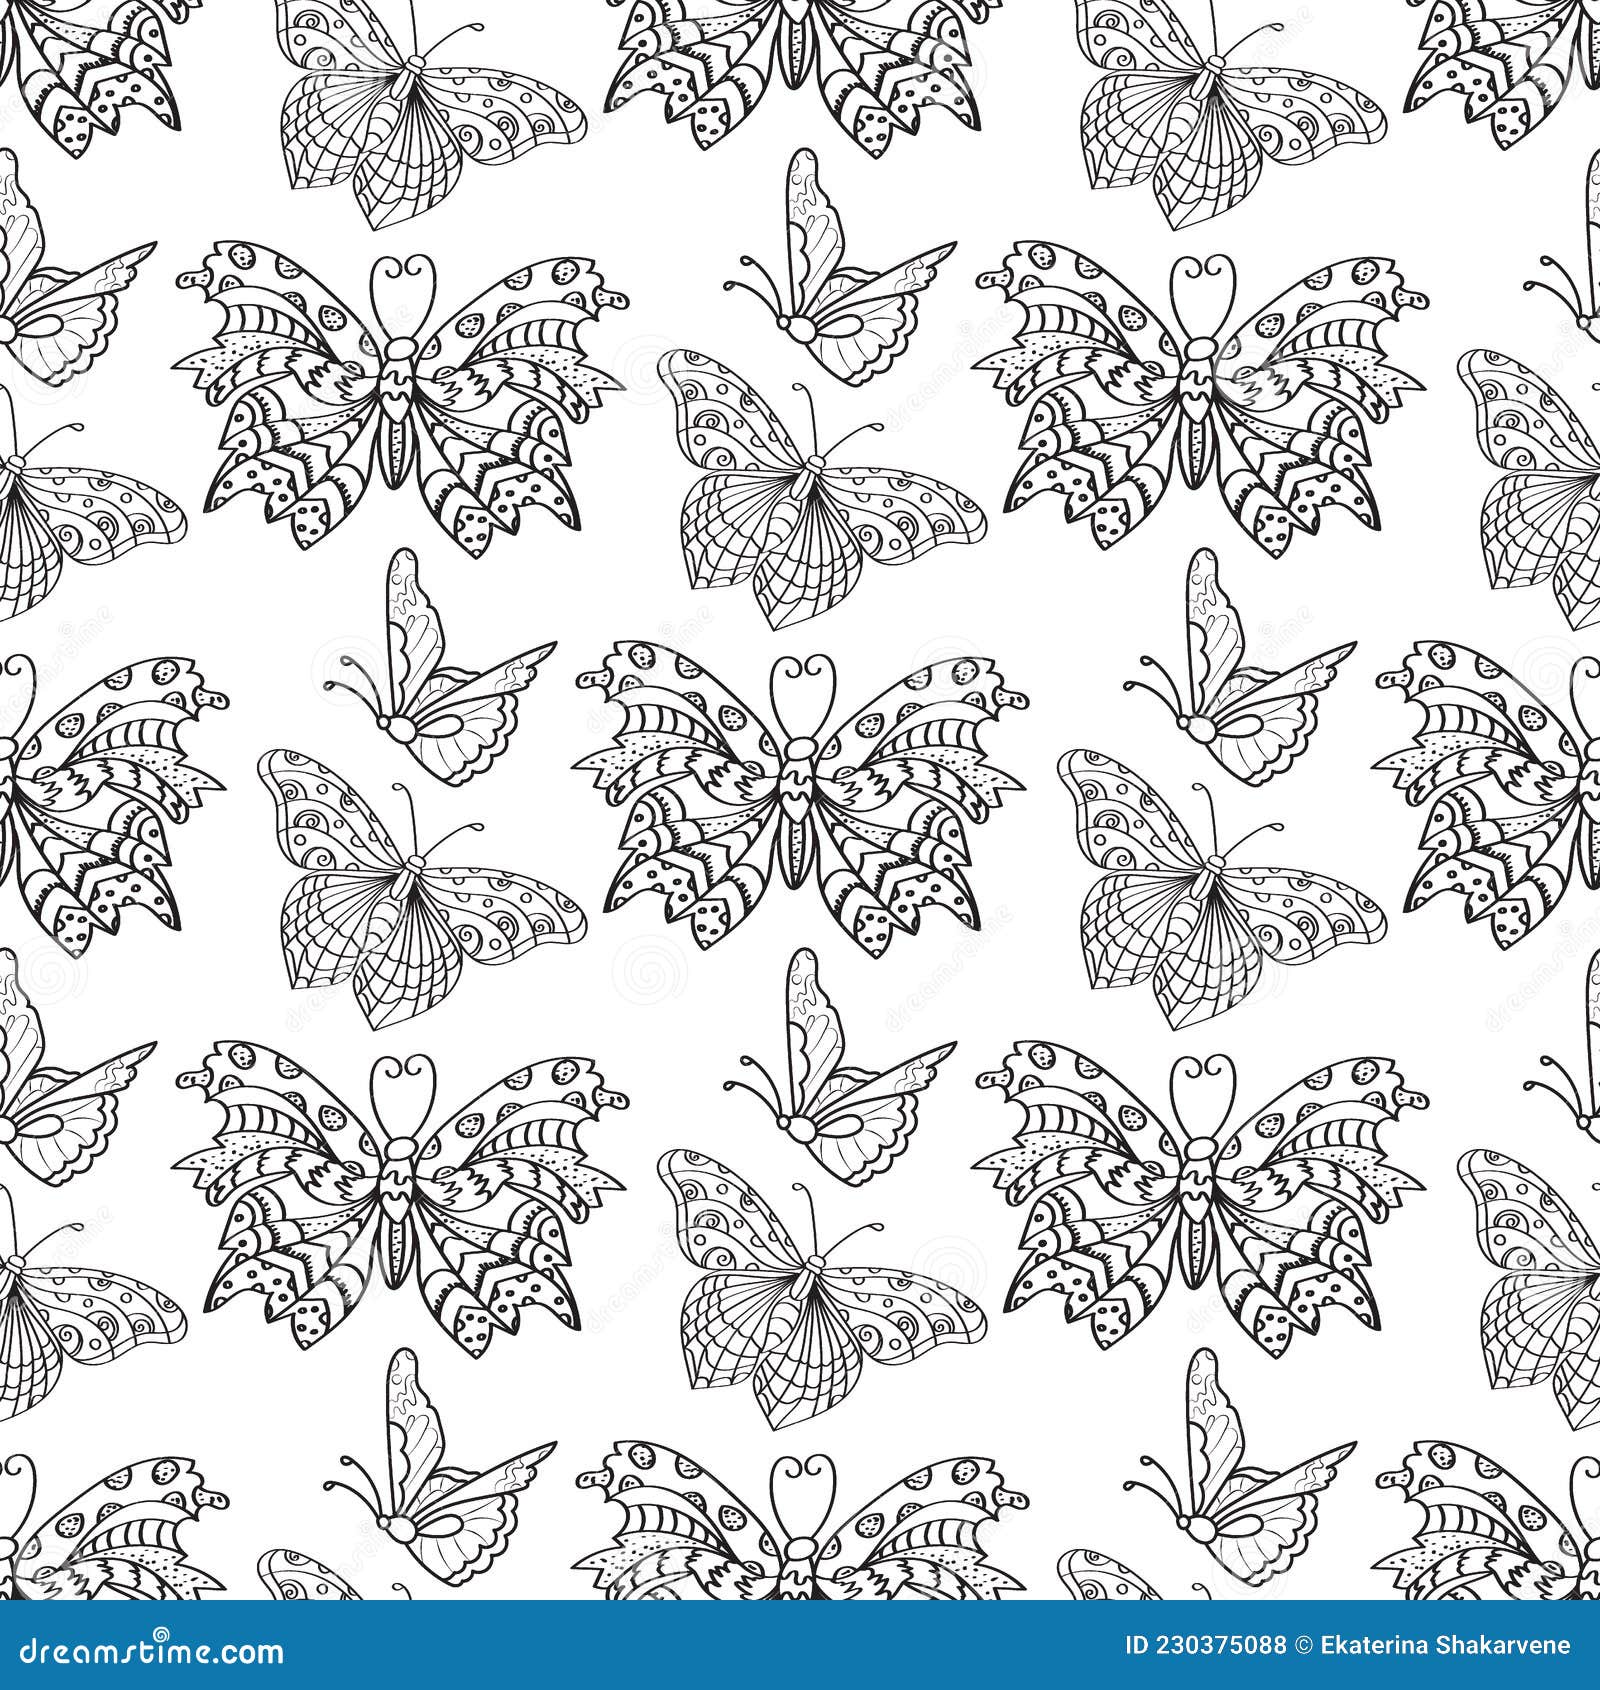 Butterfly Silhouette Seamless Pattern Background, Curly Black Outline ...